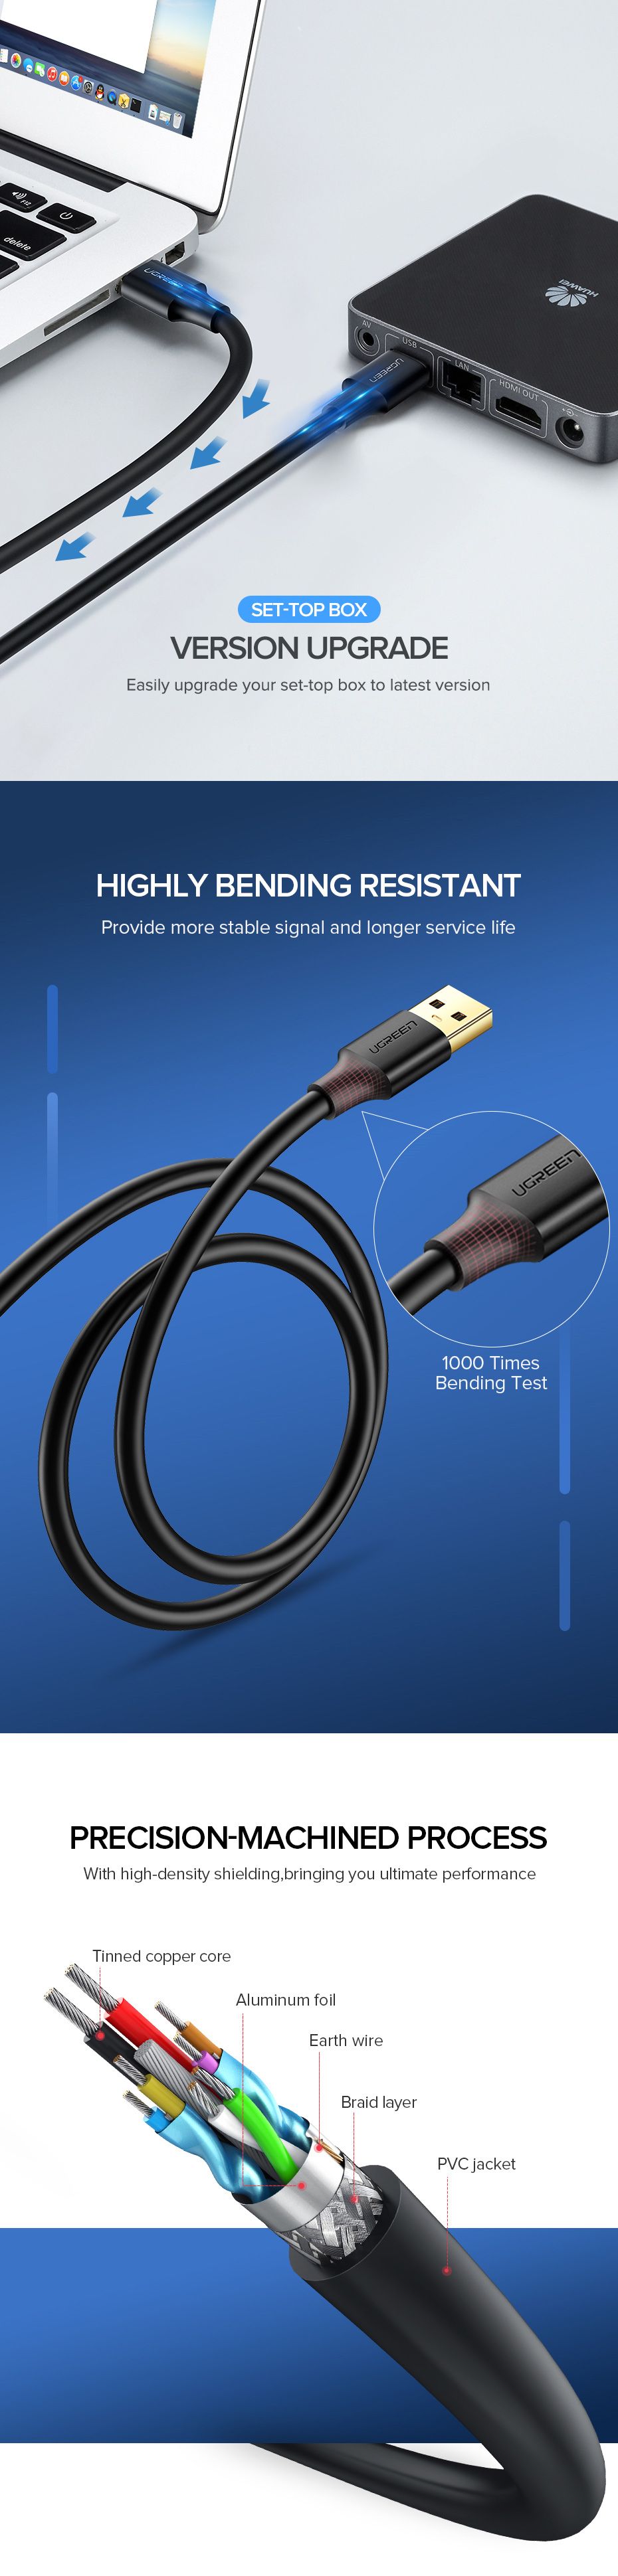 Ugreen-US128-USB-Extension-Data-Cable-USB-to-USB-Cable-Type-A-Male-to-Male-USB-30-20-Extension-Cable-1654179